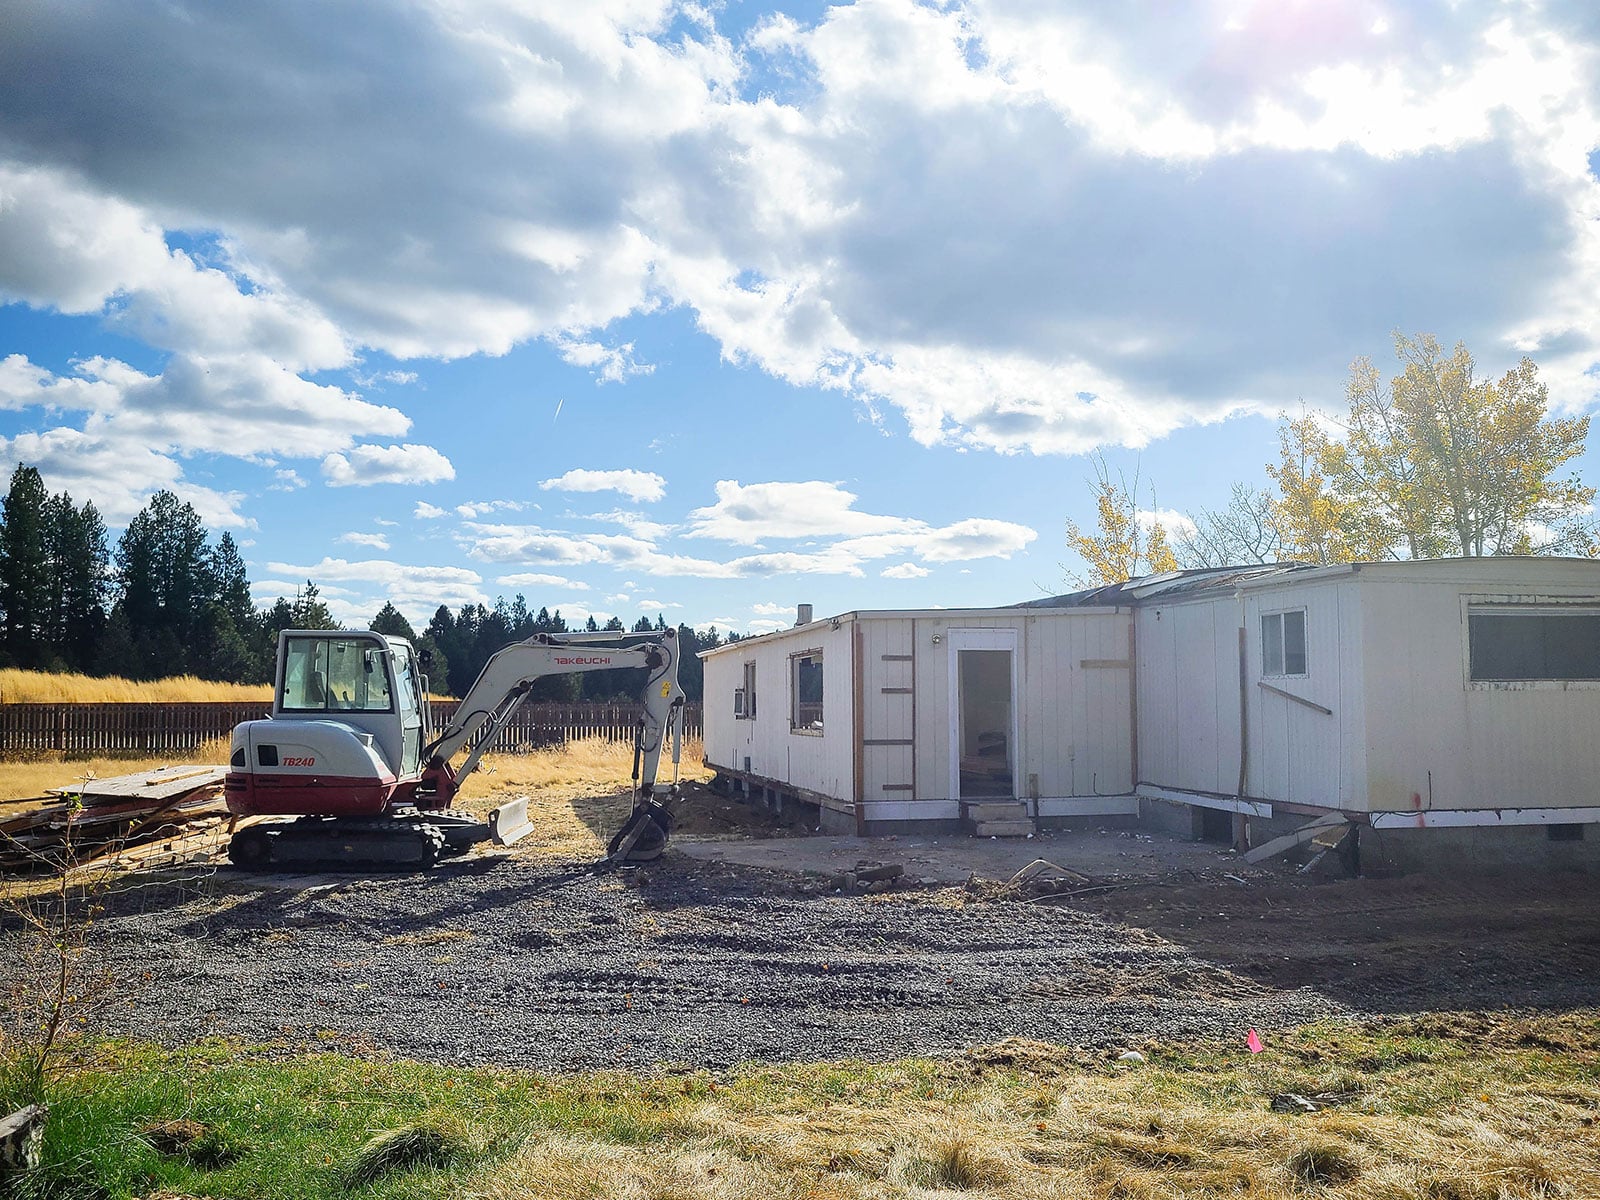 A mini excavator next to an older manufactured home